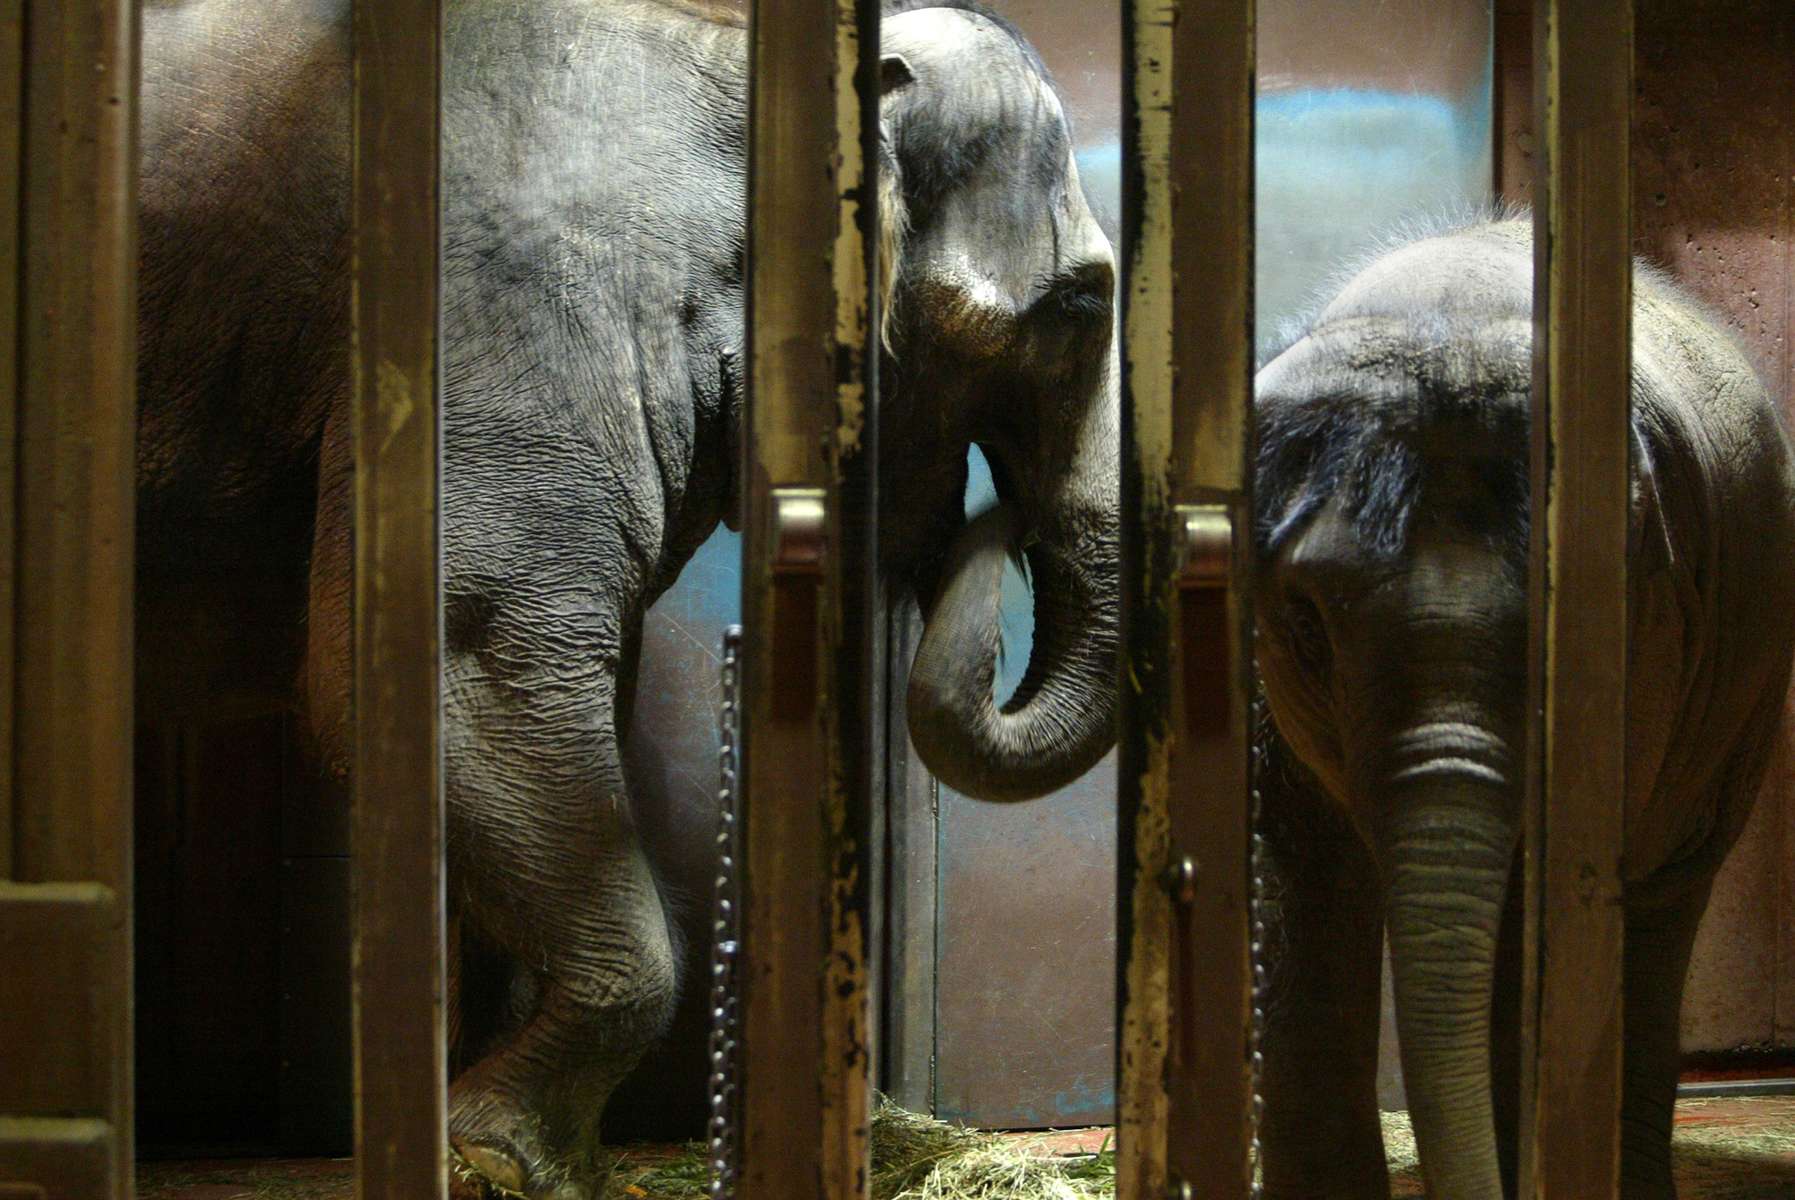 Chai, a 27 year old Asian elephant from Thailand and her baby Hansa, hang out in a cage shortly after Chai went through an artificial insemination procedure at the Woodland Park Zoo on February 28, 2005 in Seattle,WA. Hansa died a couple years later from a herpes virus that had been passed from her mother. Nevertheless, scientists continue to artificially inseminate Chai. To date (Jan. 2012) Chai has been artificially inseminated 61 times without success of pregnancy. Advocates' have plead for the zoo to stop this proceedure for years. (photo/Karen Ducey).